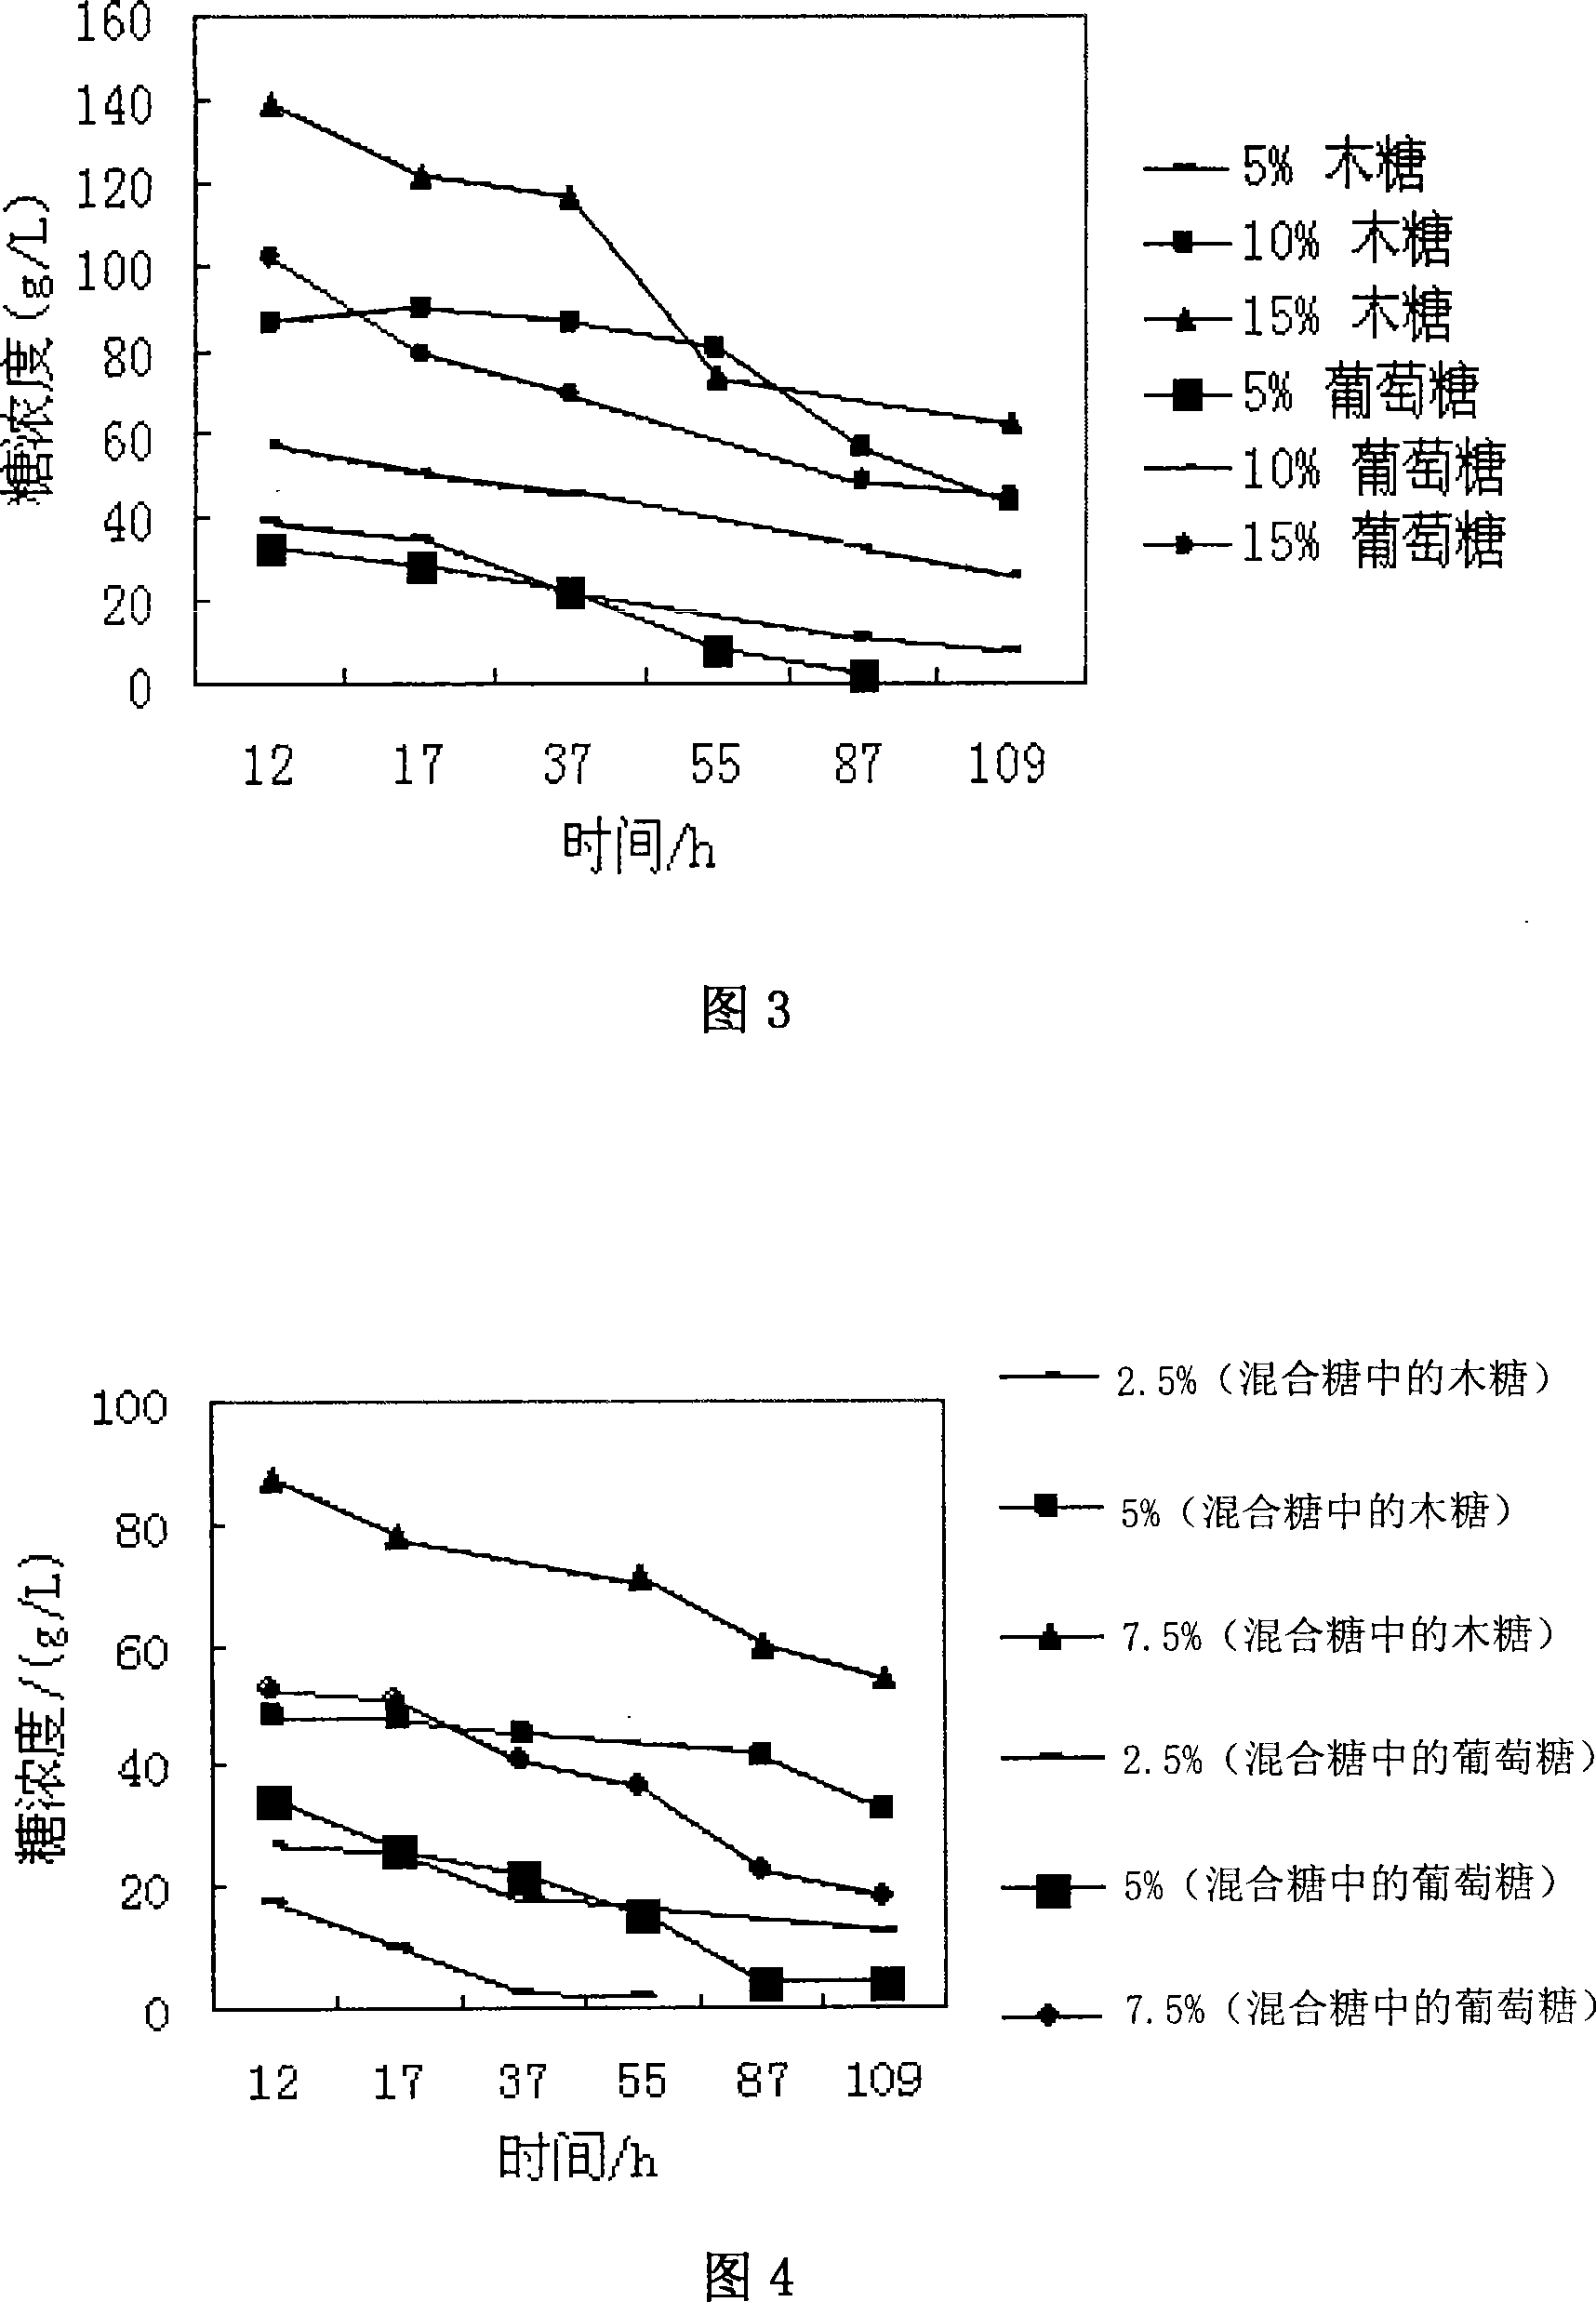 Recombinant saccharomyces cerevisiae for producing ethanol by using xylose and glucose